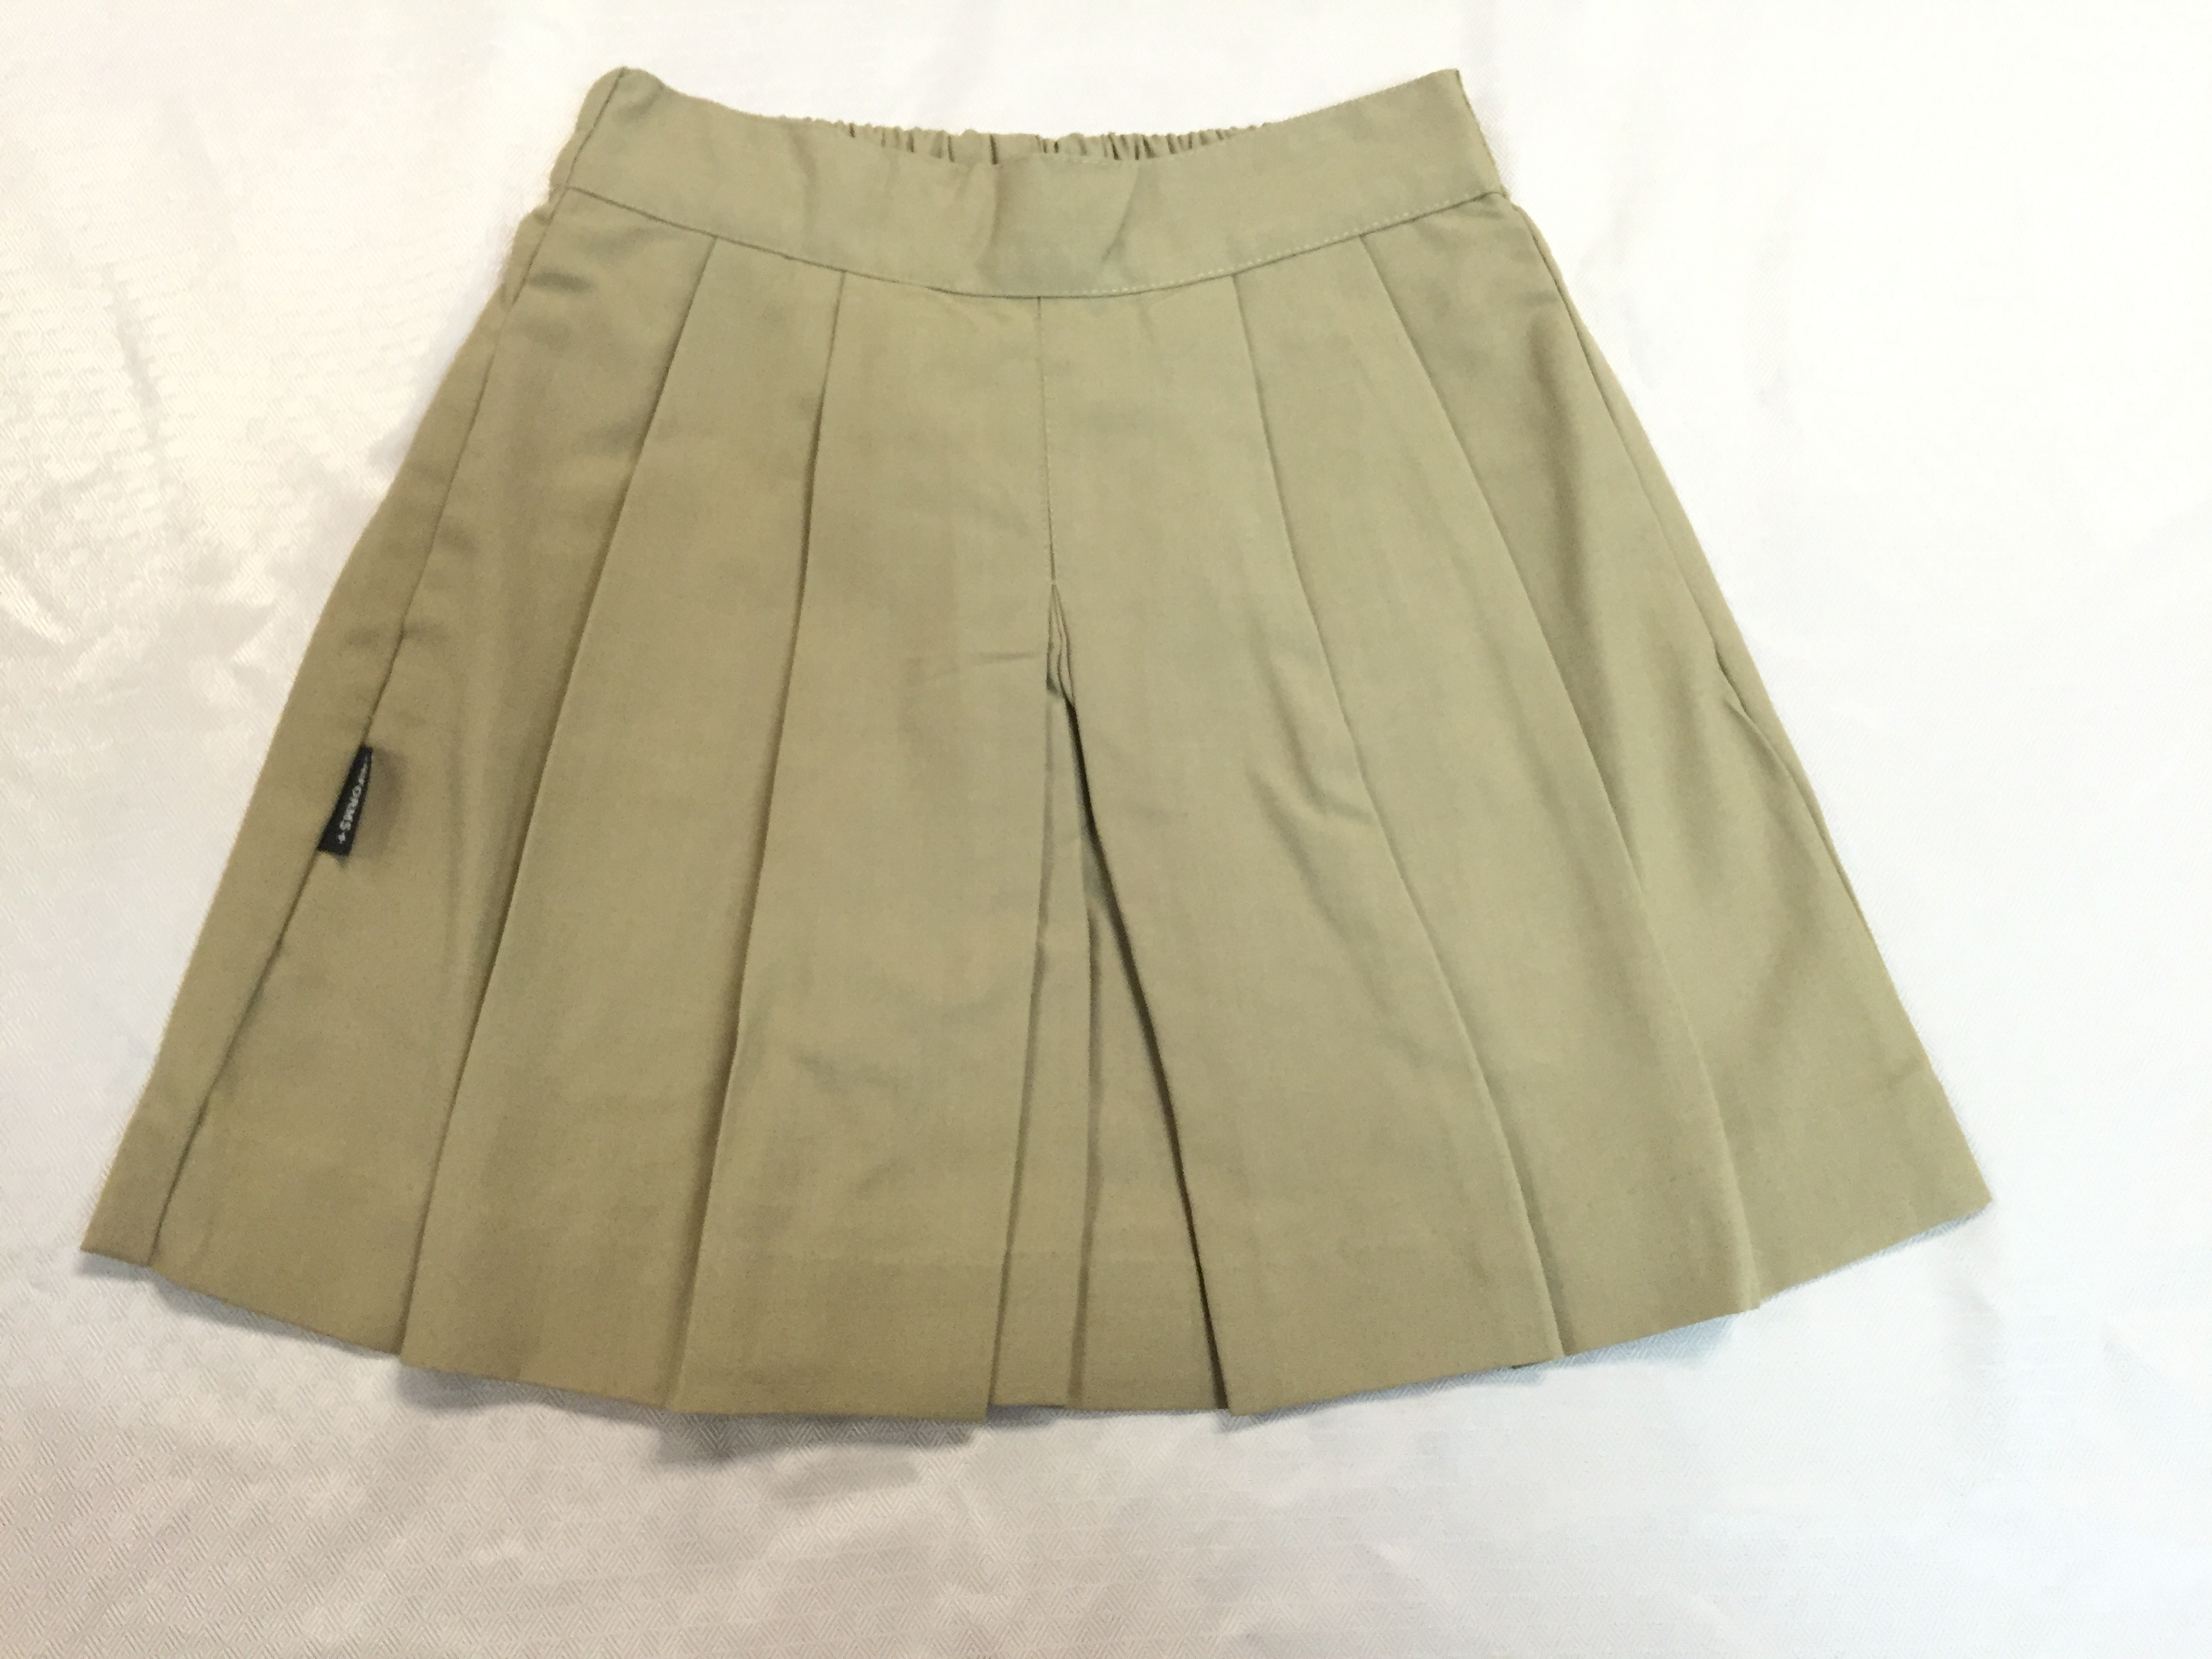 Clearance Pleated Culottes, Khaki – Sizes 8-18 Regular (Sales are Final on Clearance Culottes)